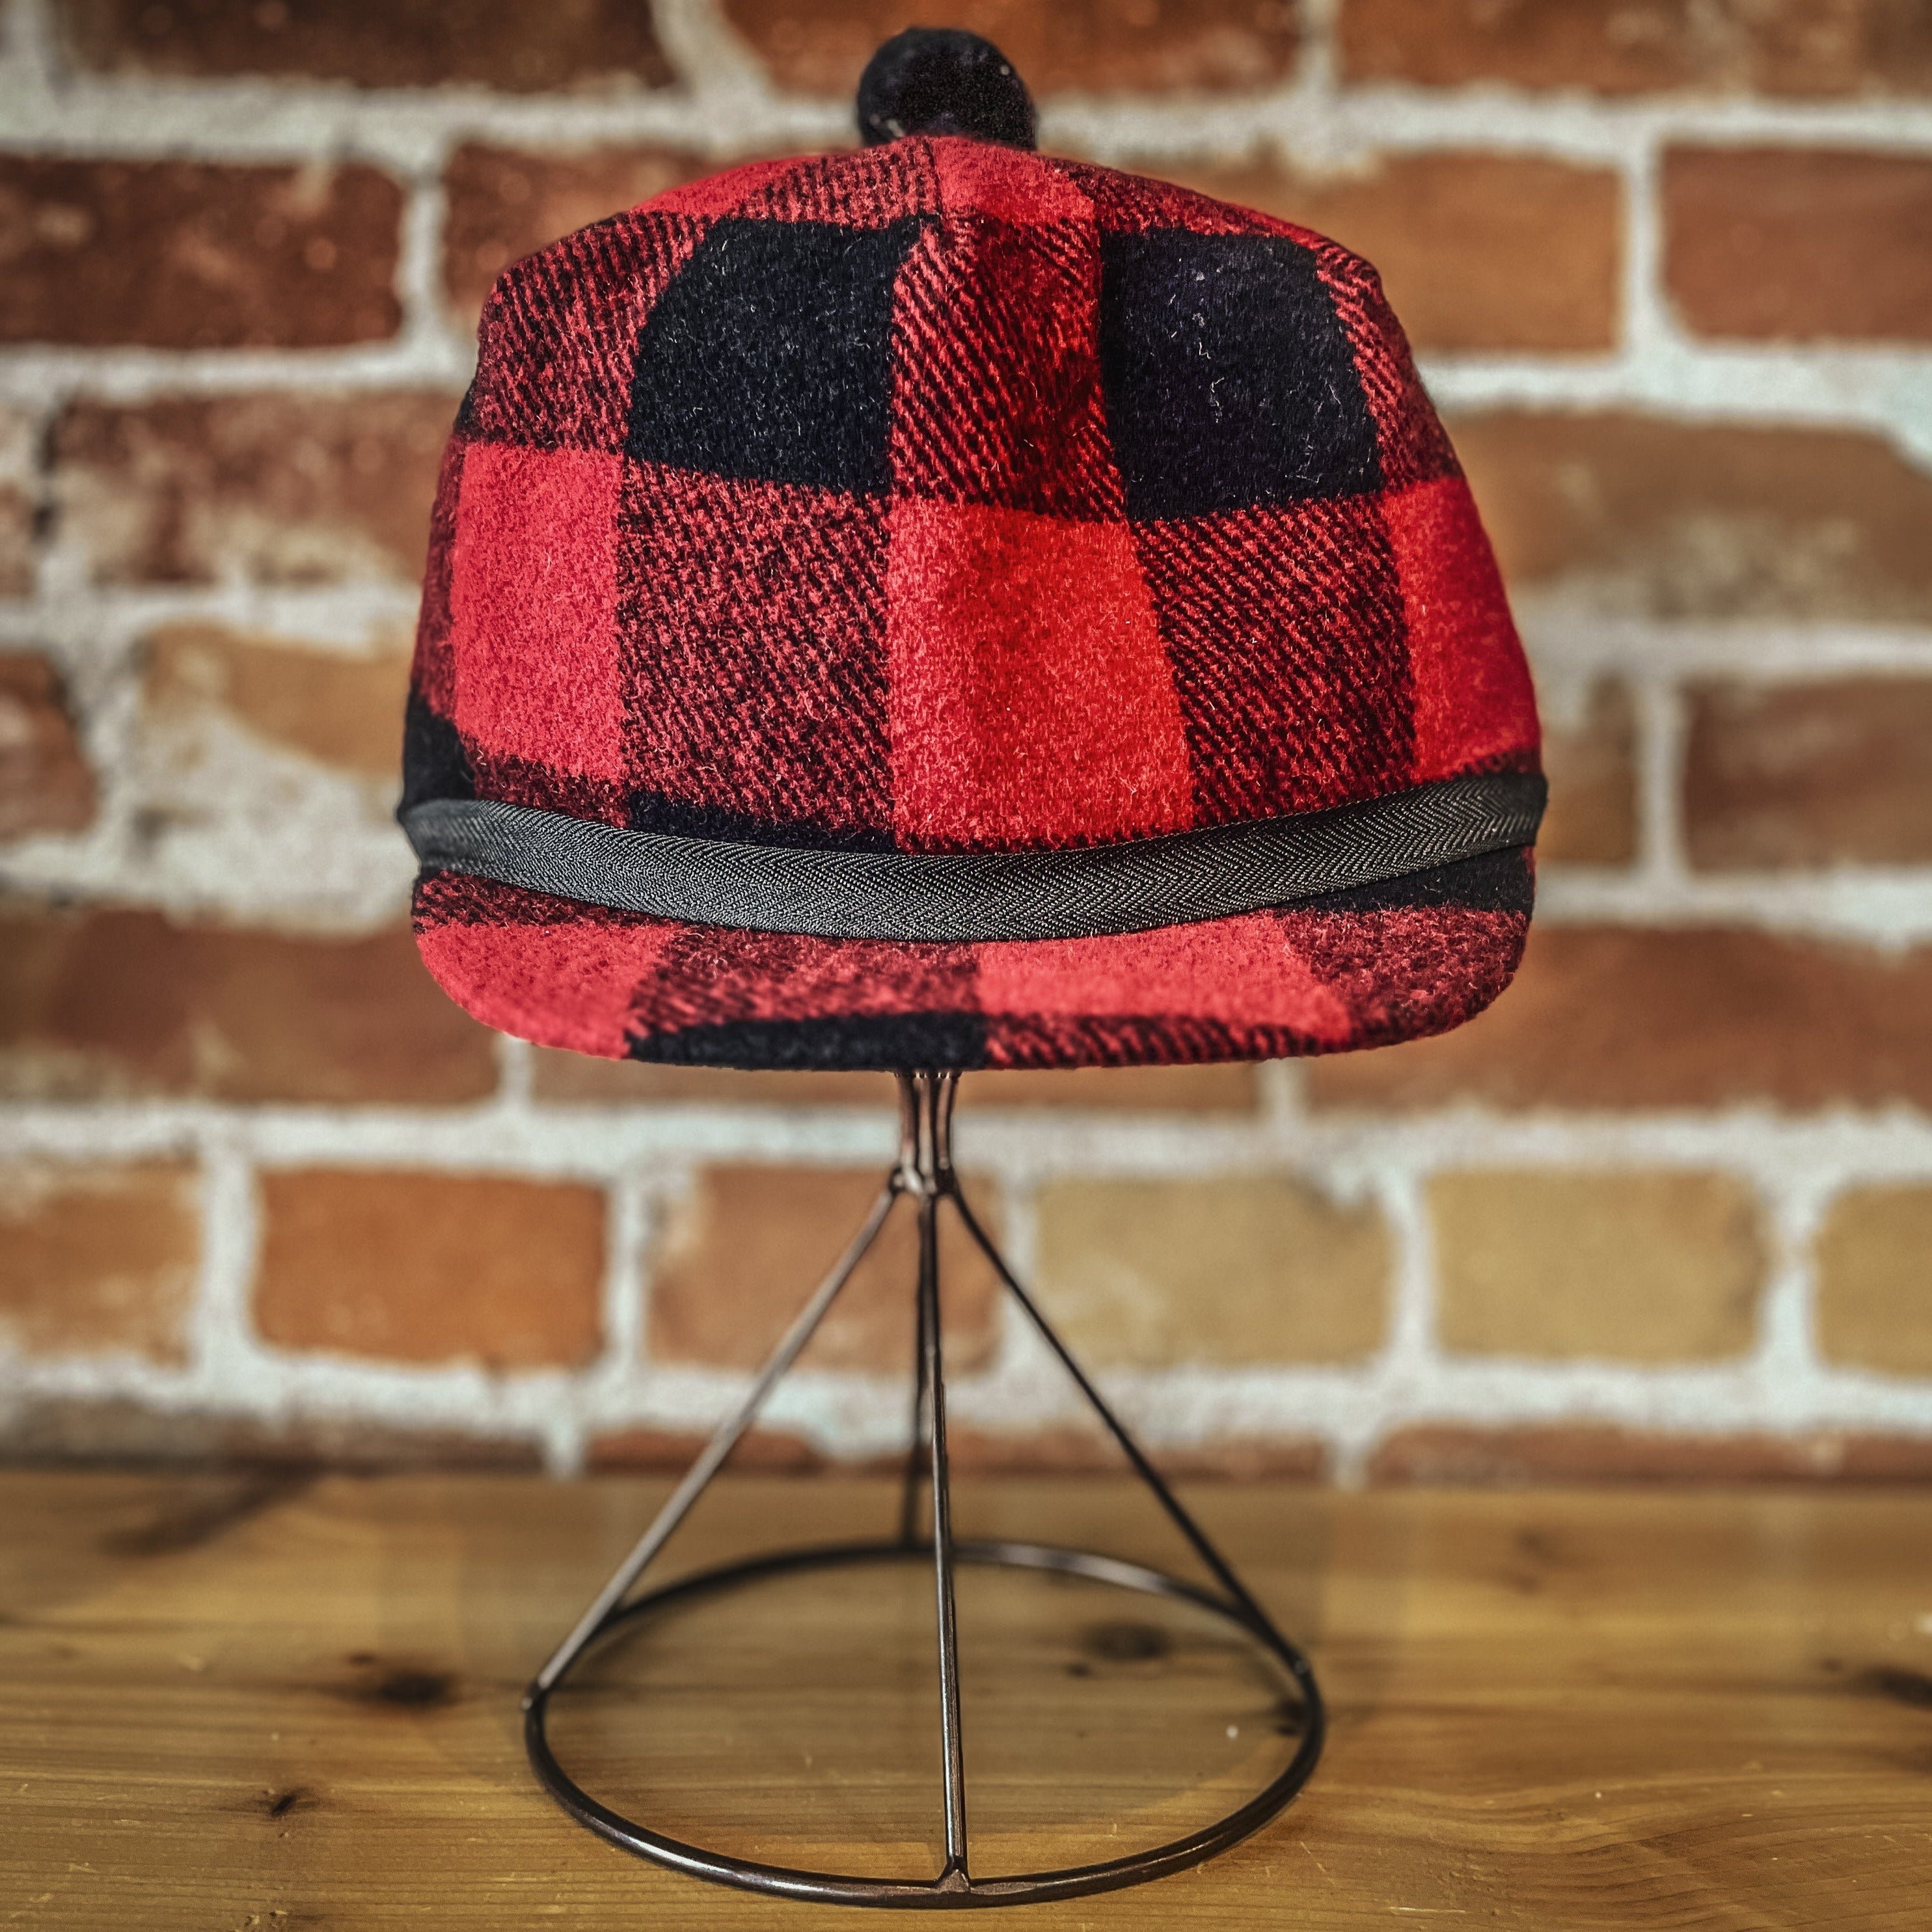 Melton Buffalo Check Stockman Cap in Red and Black